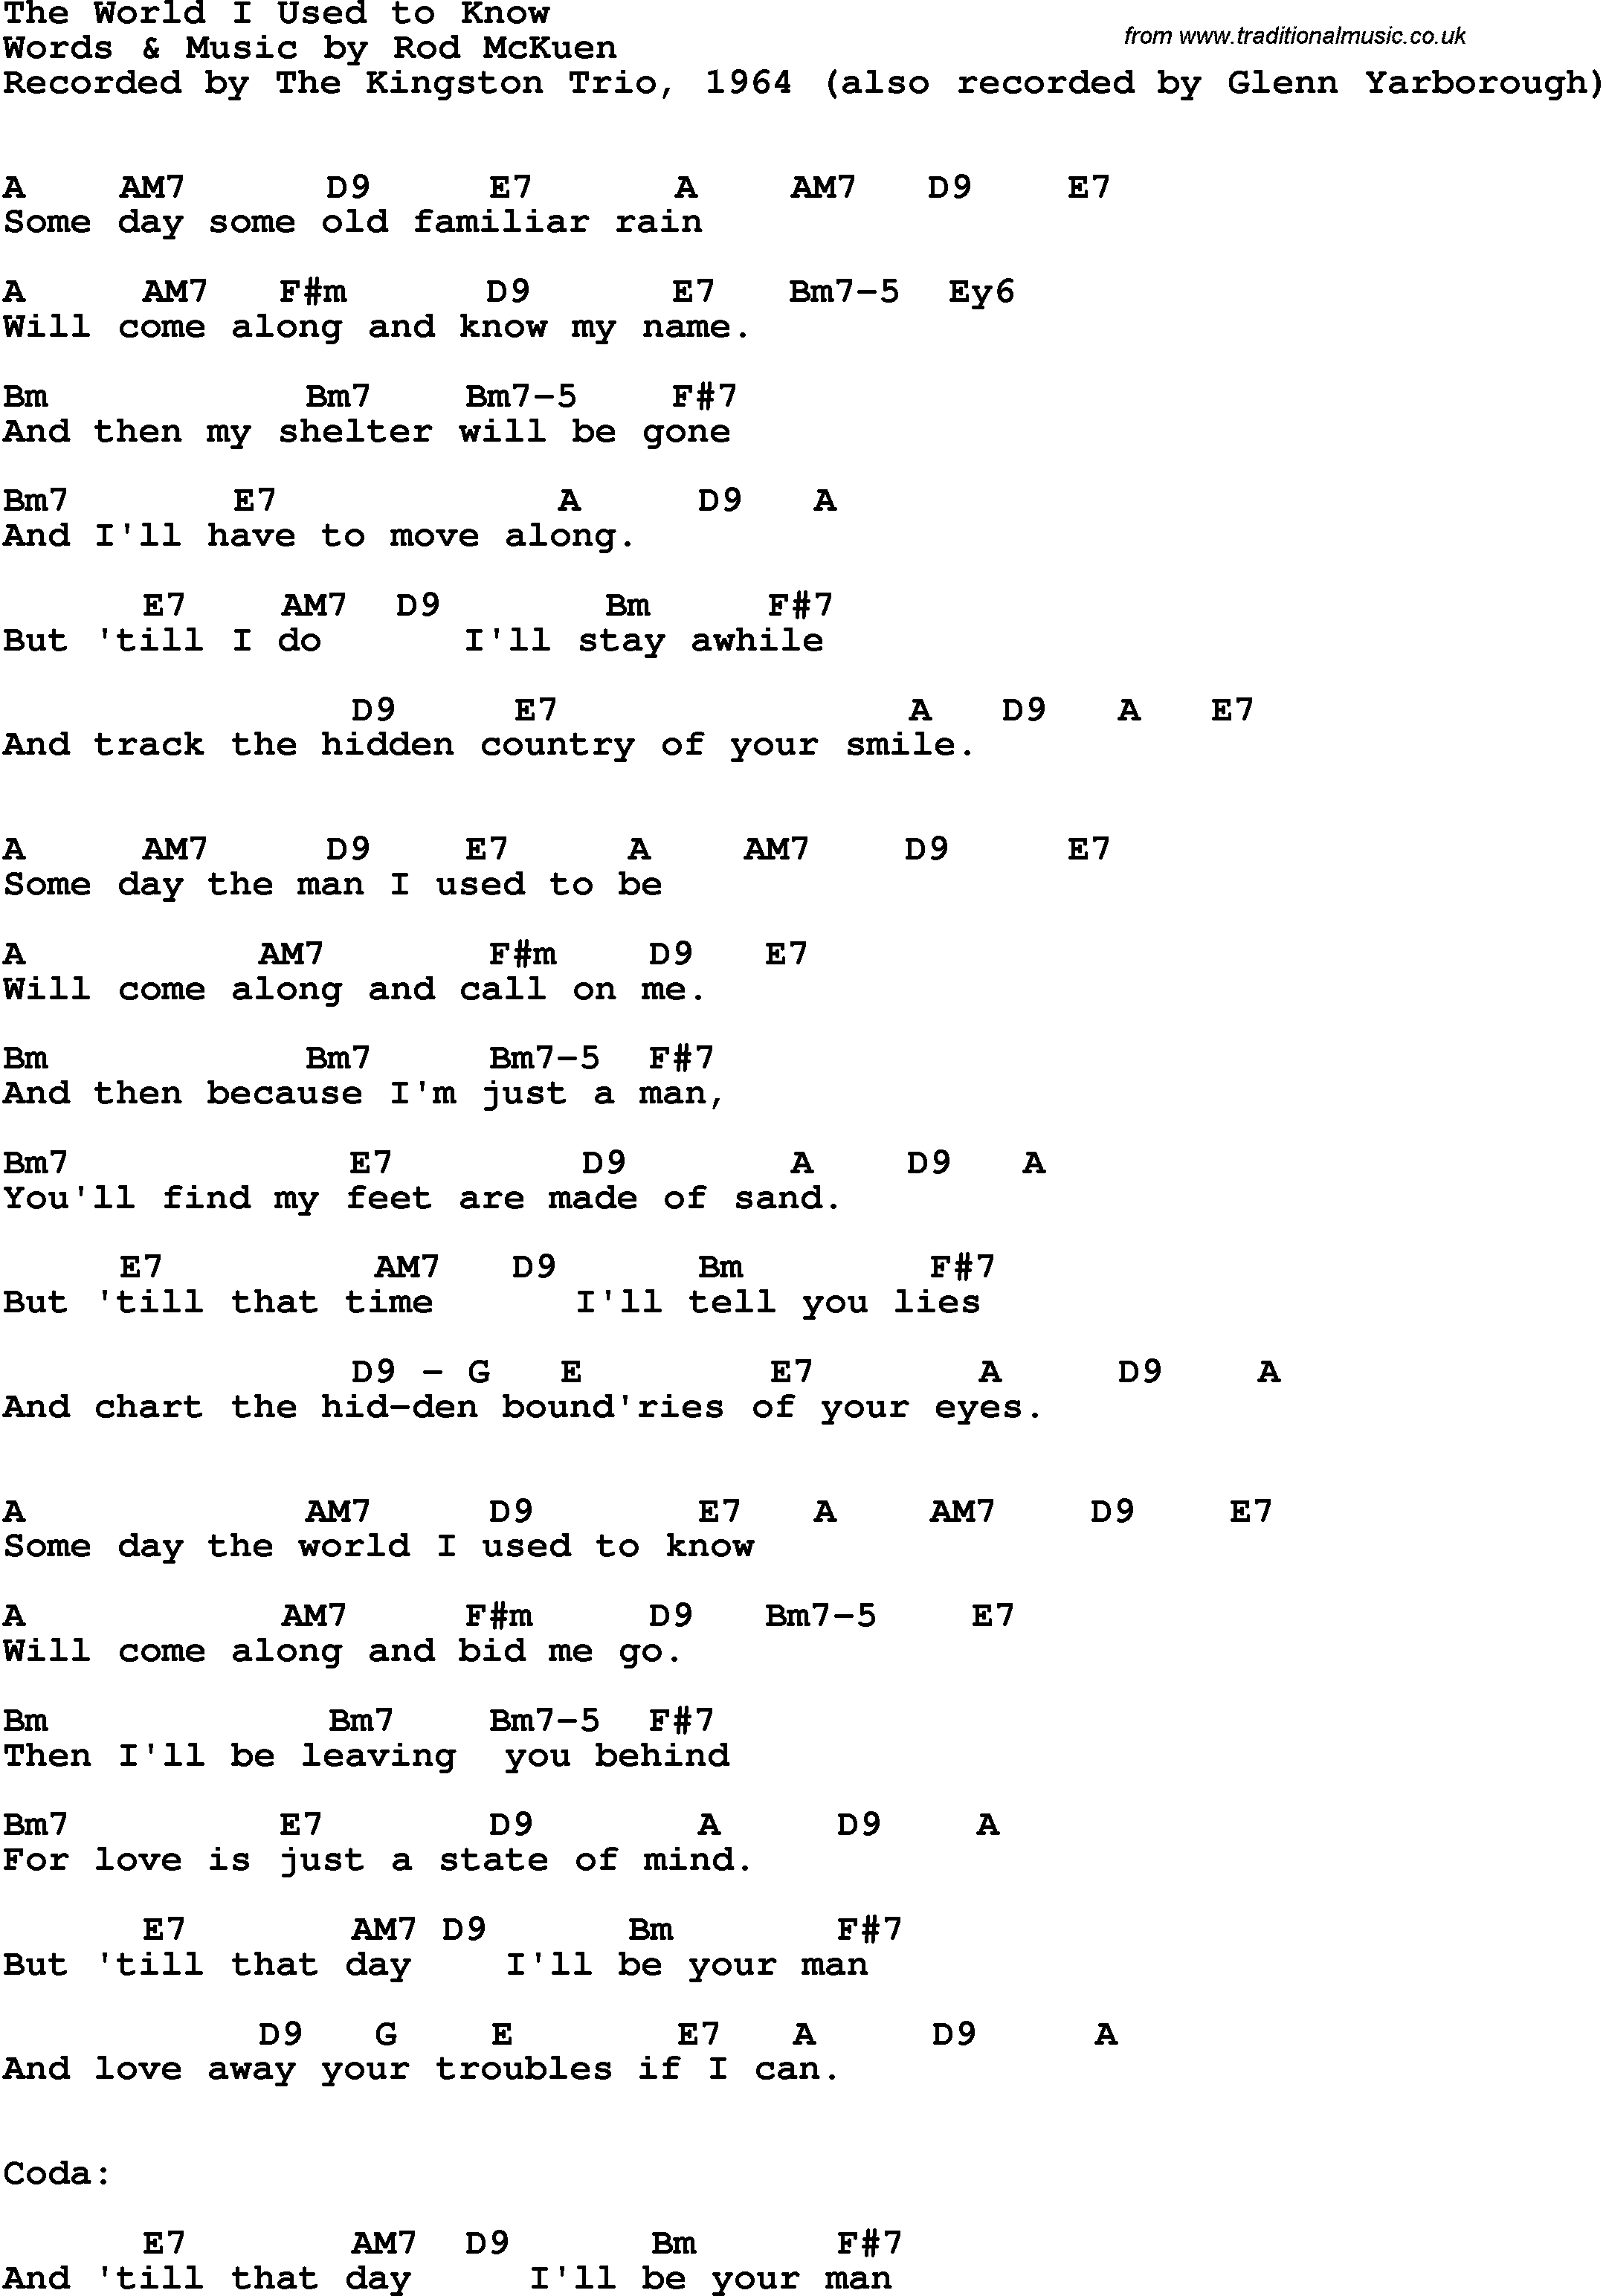 Song Lyrics with guitar chords for World I Used To Know, The - The Kingston Trio, 1964